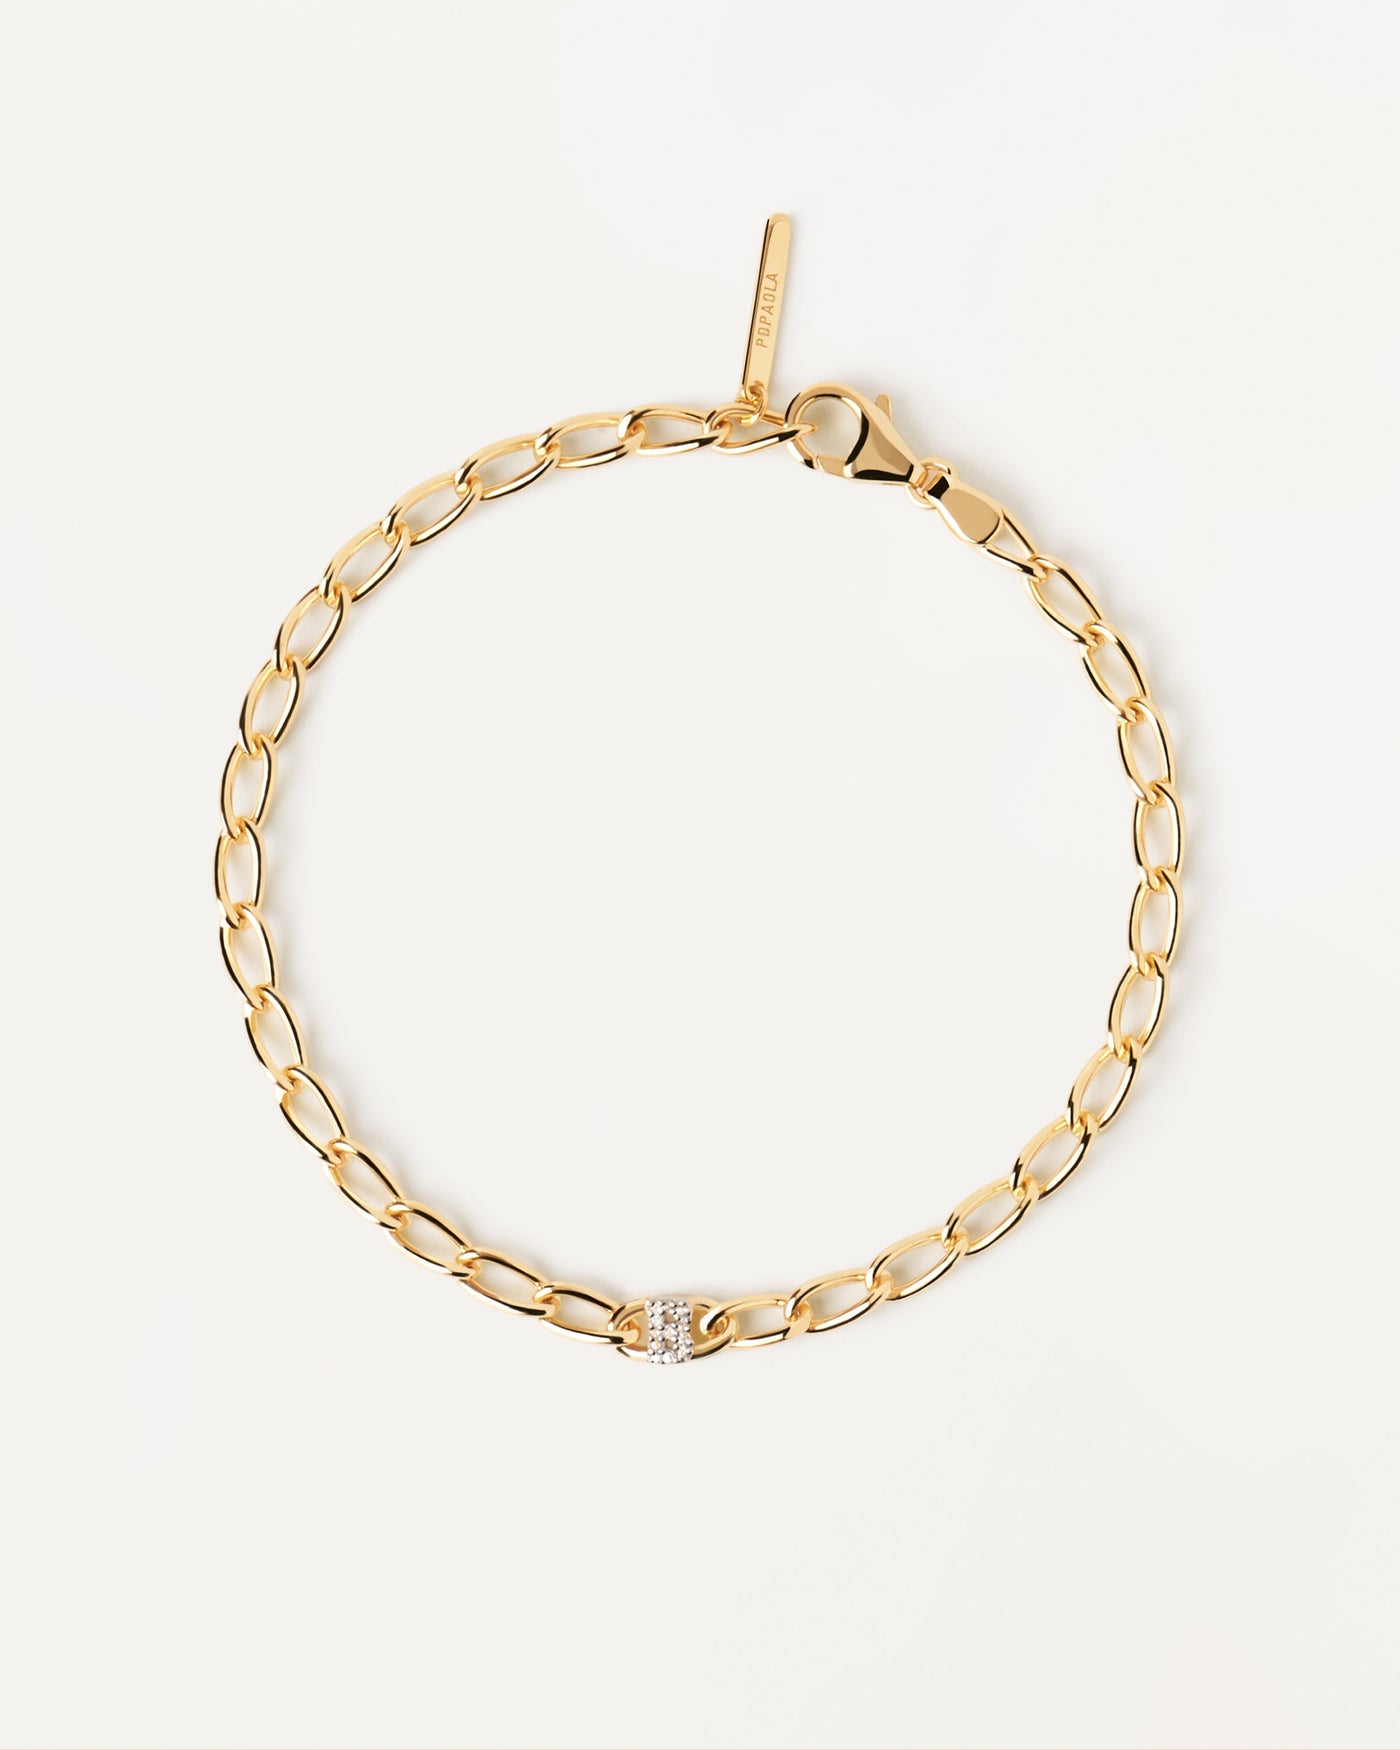 2023 Selection | Letter B Chain Bracelet. cable chain bracelet in gold-plated silver with initial B in zirconia. Get the latest arrival from PDPAOLA. Place your order safely and get this Best Seller. Free Shipping.